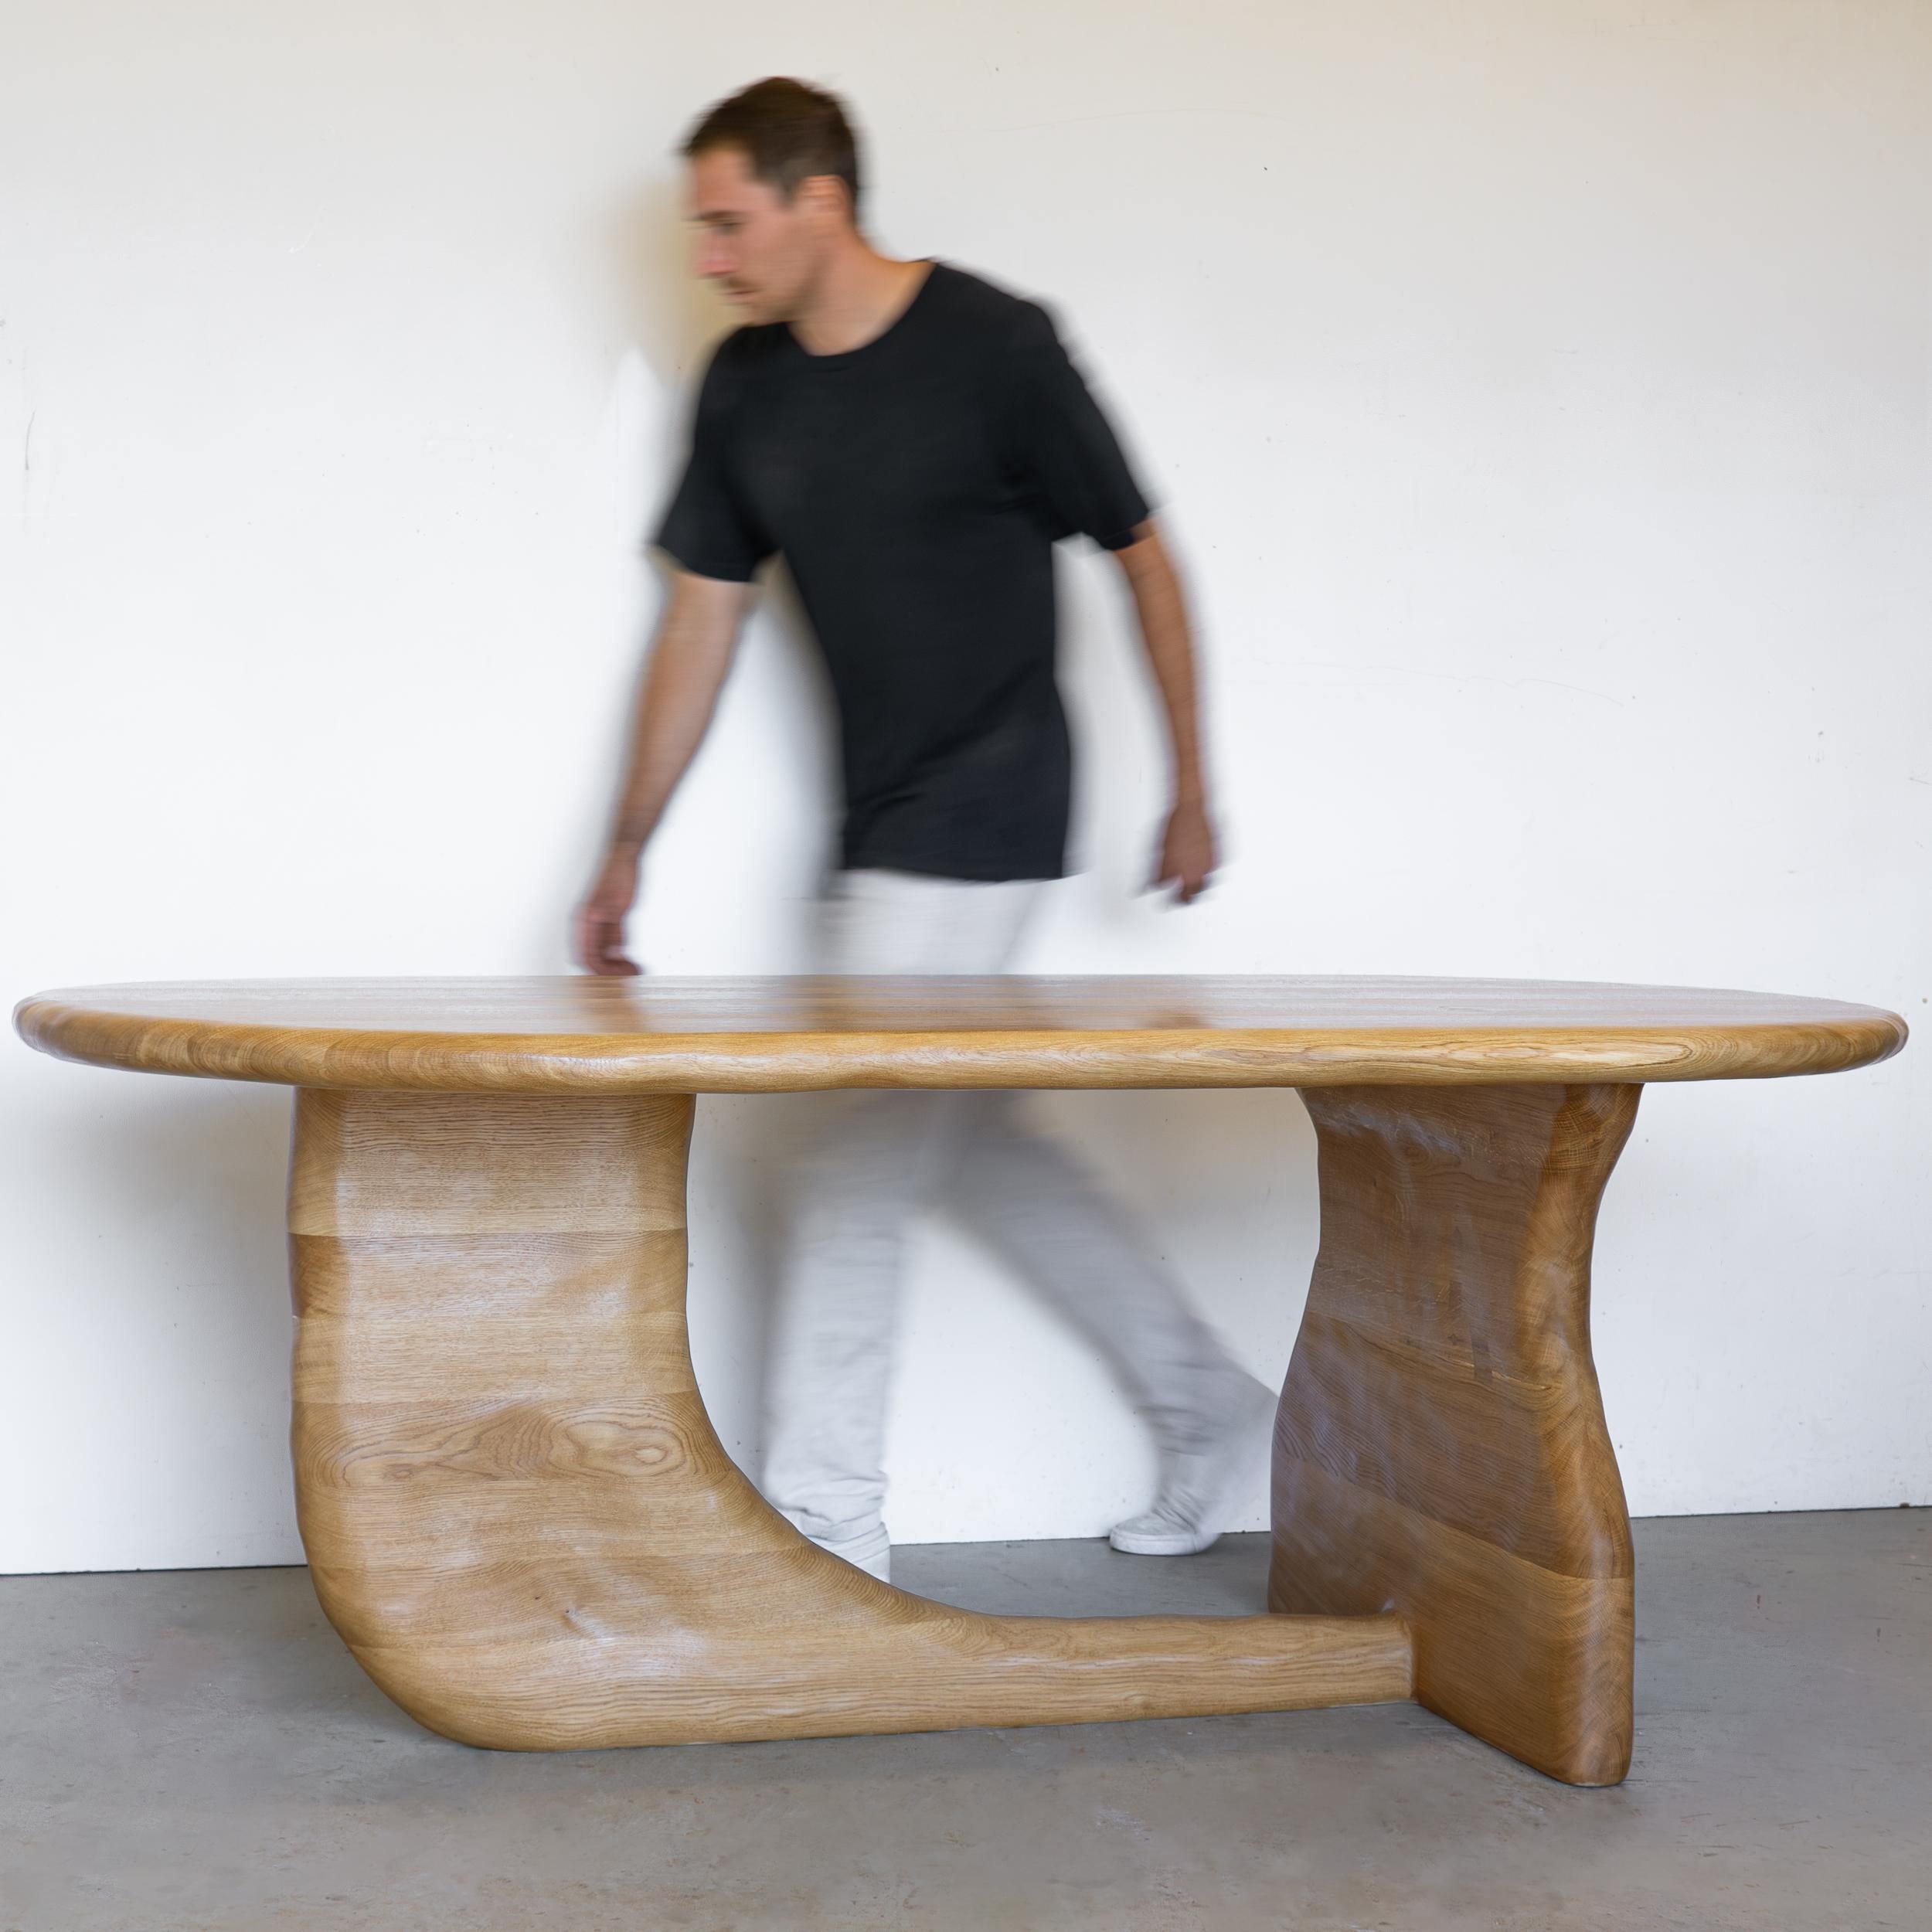 The Curvo Dining Table is sculpted using various hand tools, making each piece unique with its own distinctive wood grain. The sculptural table is characterized by its seamless flow, with no sharp edges or corners. It is crafted from a one piece of